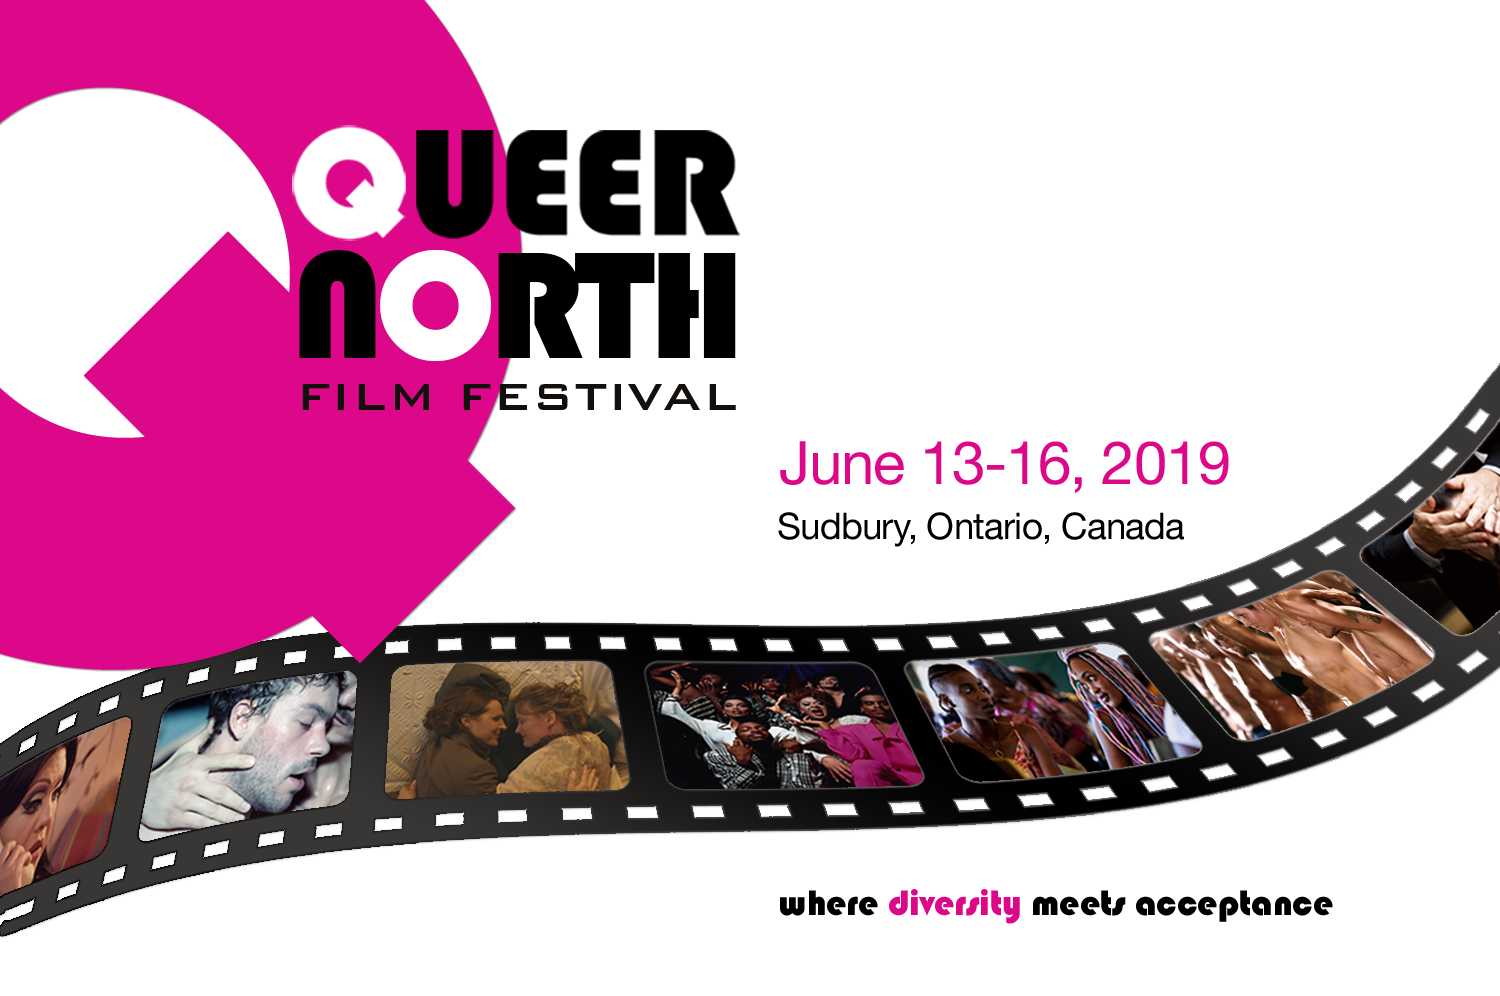 QUEER NORTH FILM FESTIVAL: 4 DAYS OF THE BEST IN QUEER CINEMA